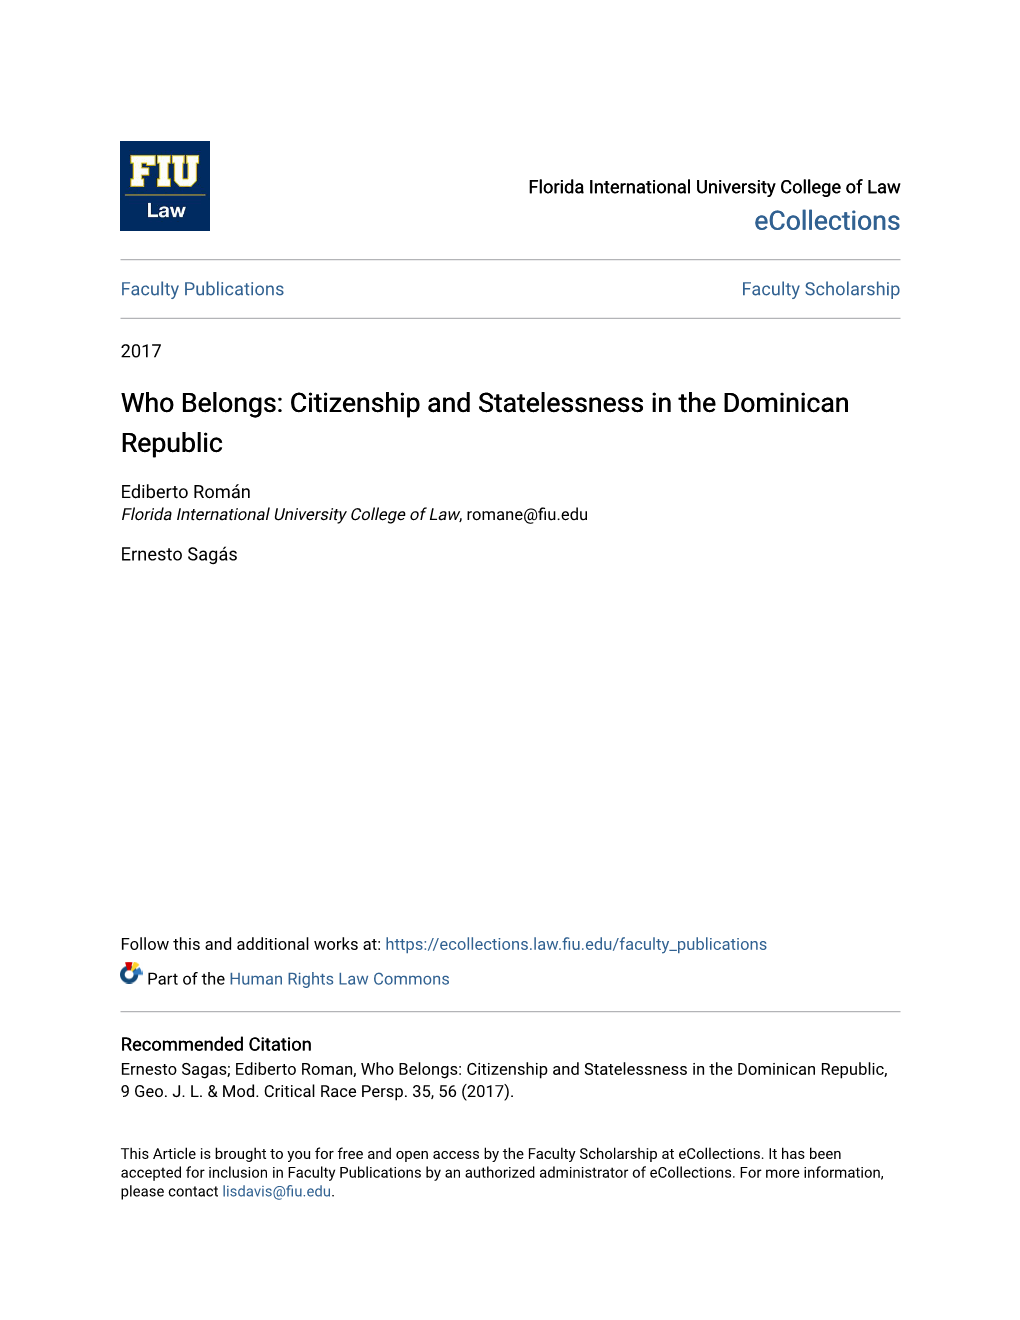 Citizenship and Statelessness in the Dominican Republic